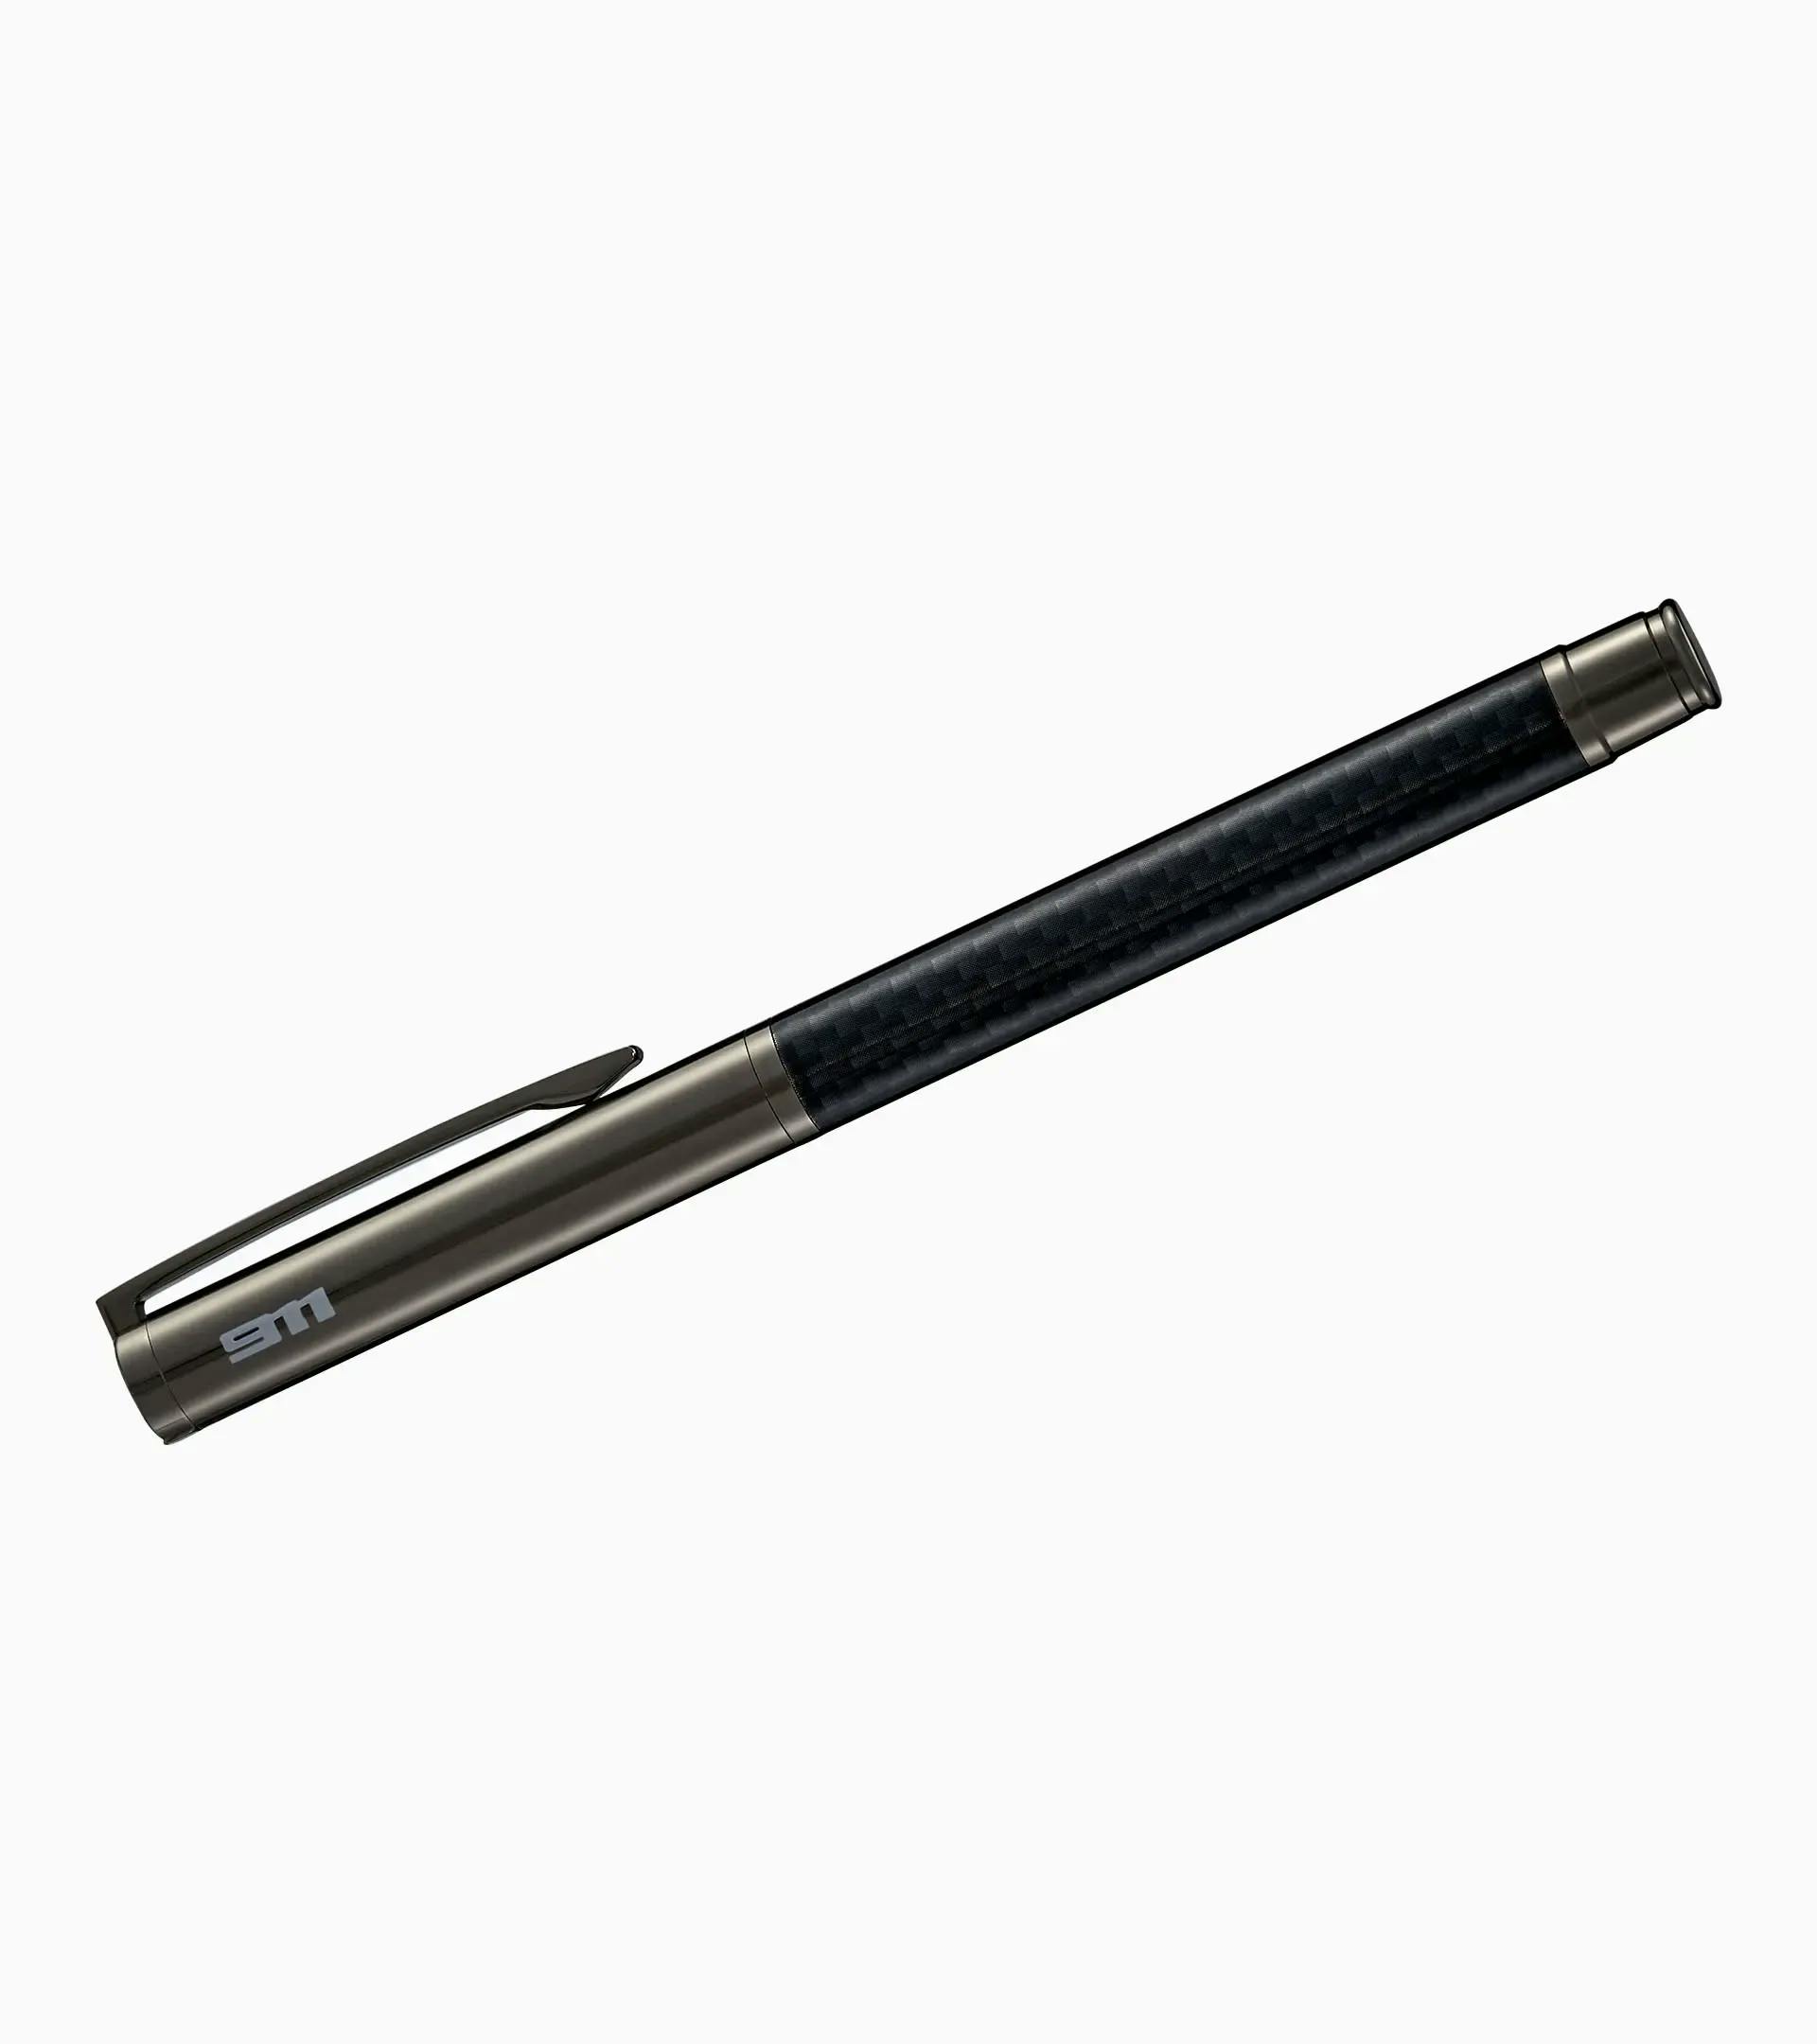 Stylo roller 911 – Essential 1